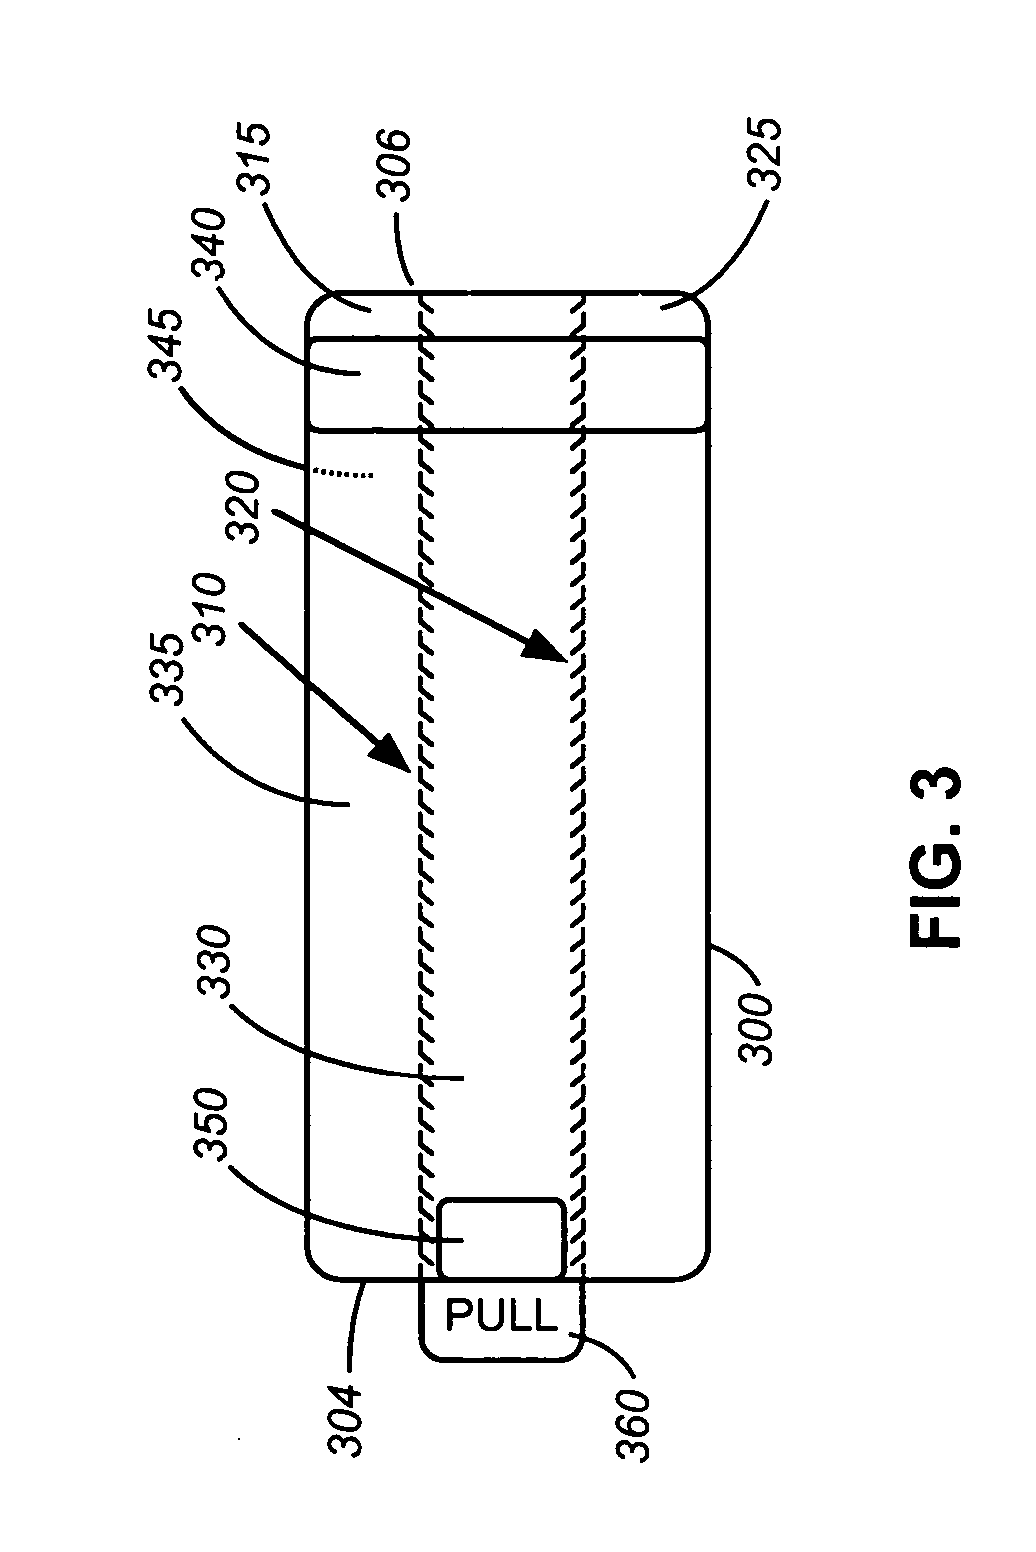 Package closure device